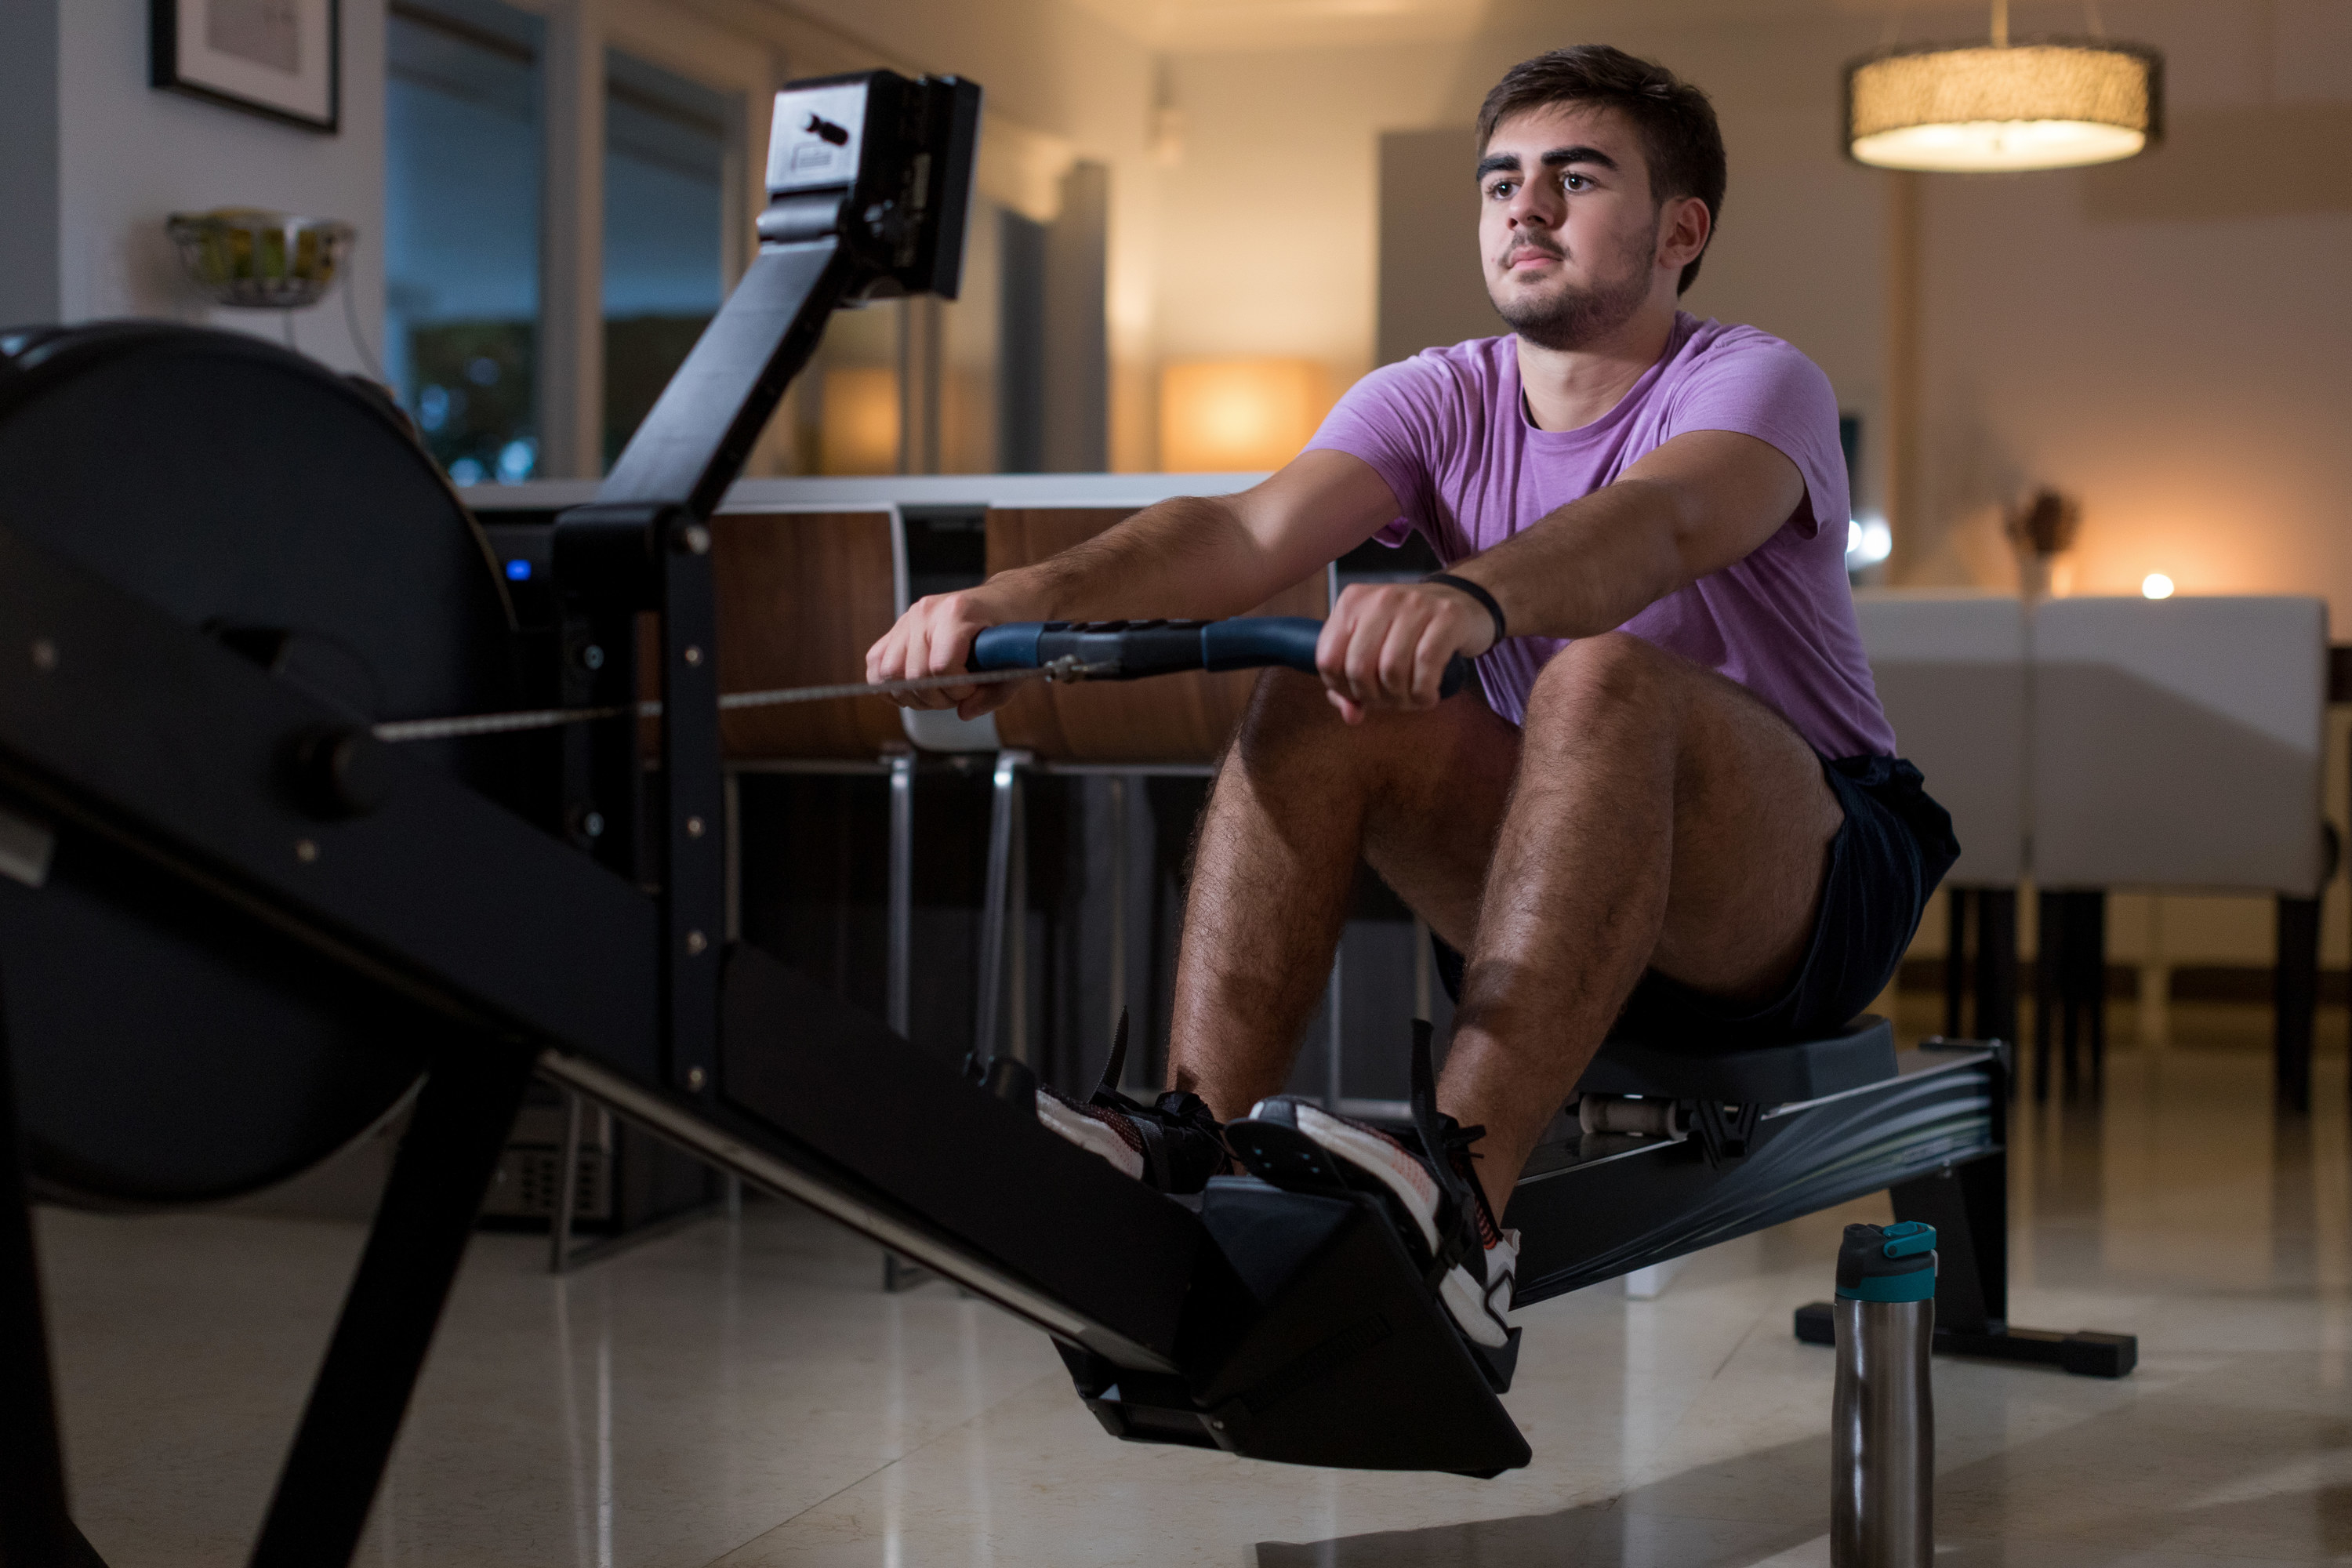 A man uses a rowing machine in his apartment